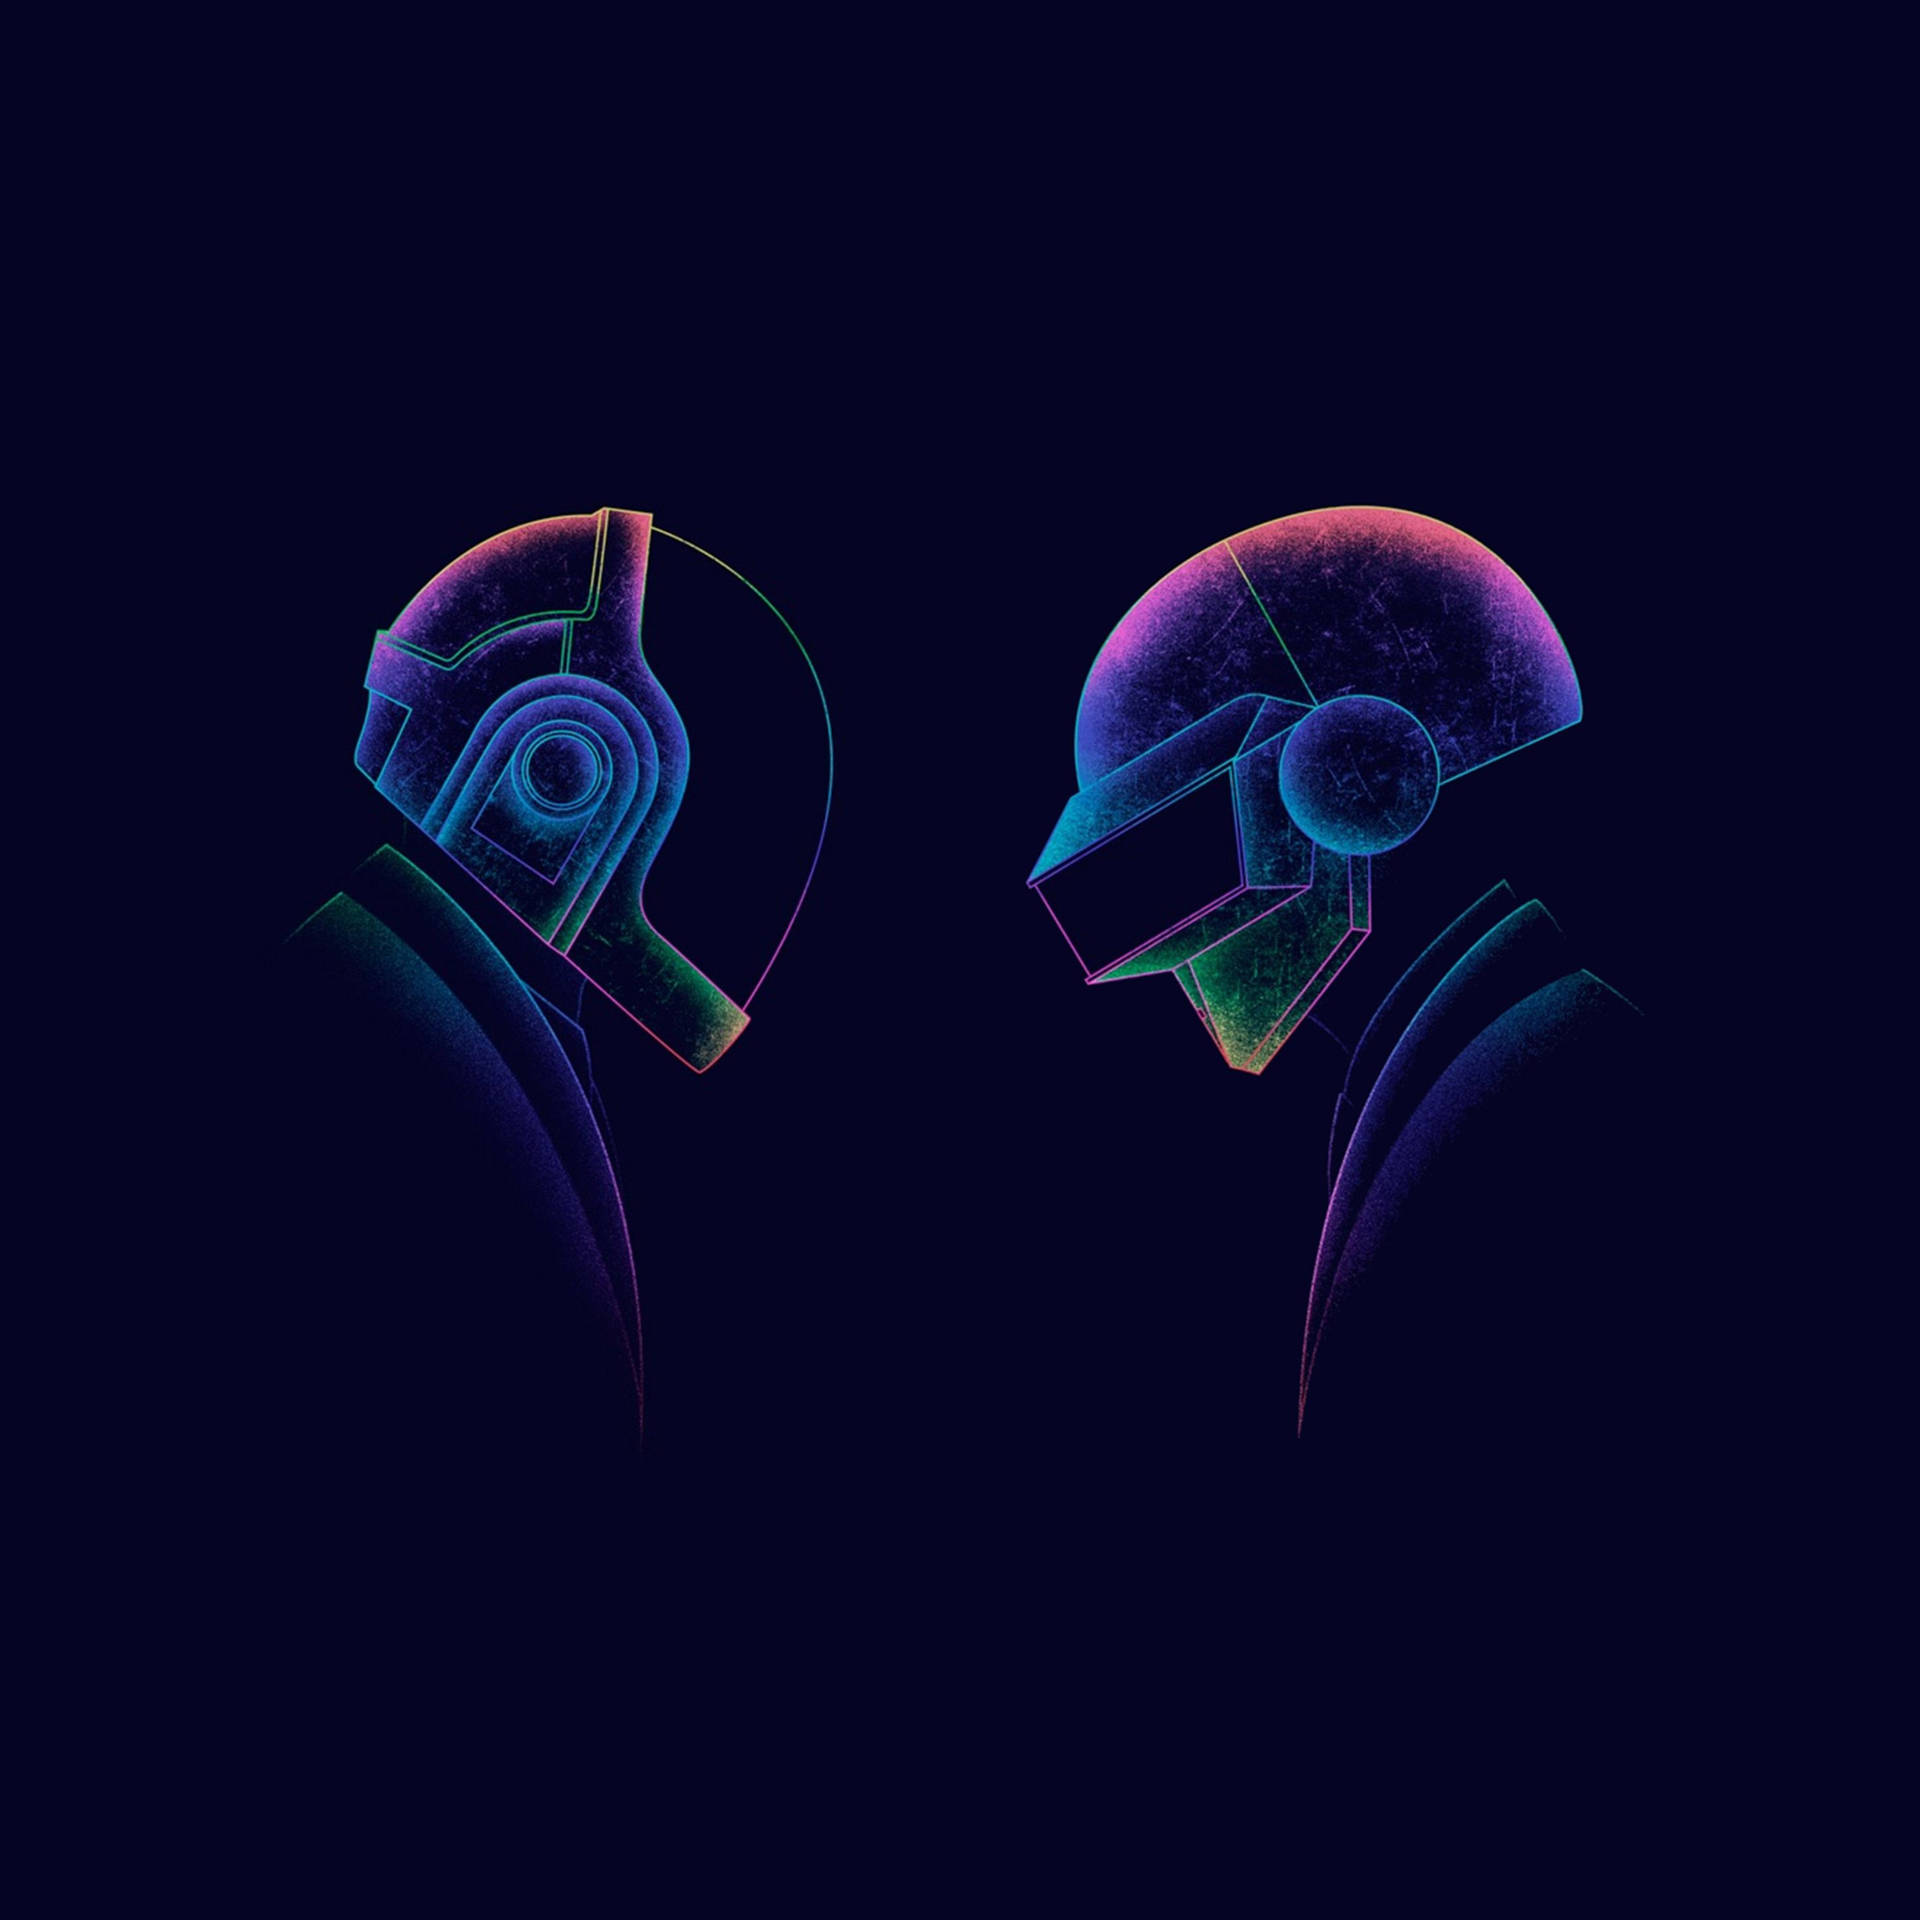 Daft Punk 2932X2932 Wallpaper and Background Image